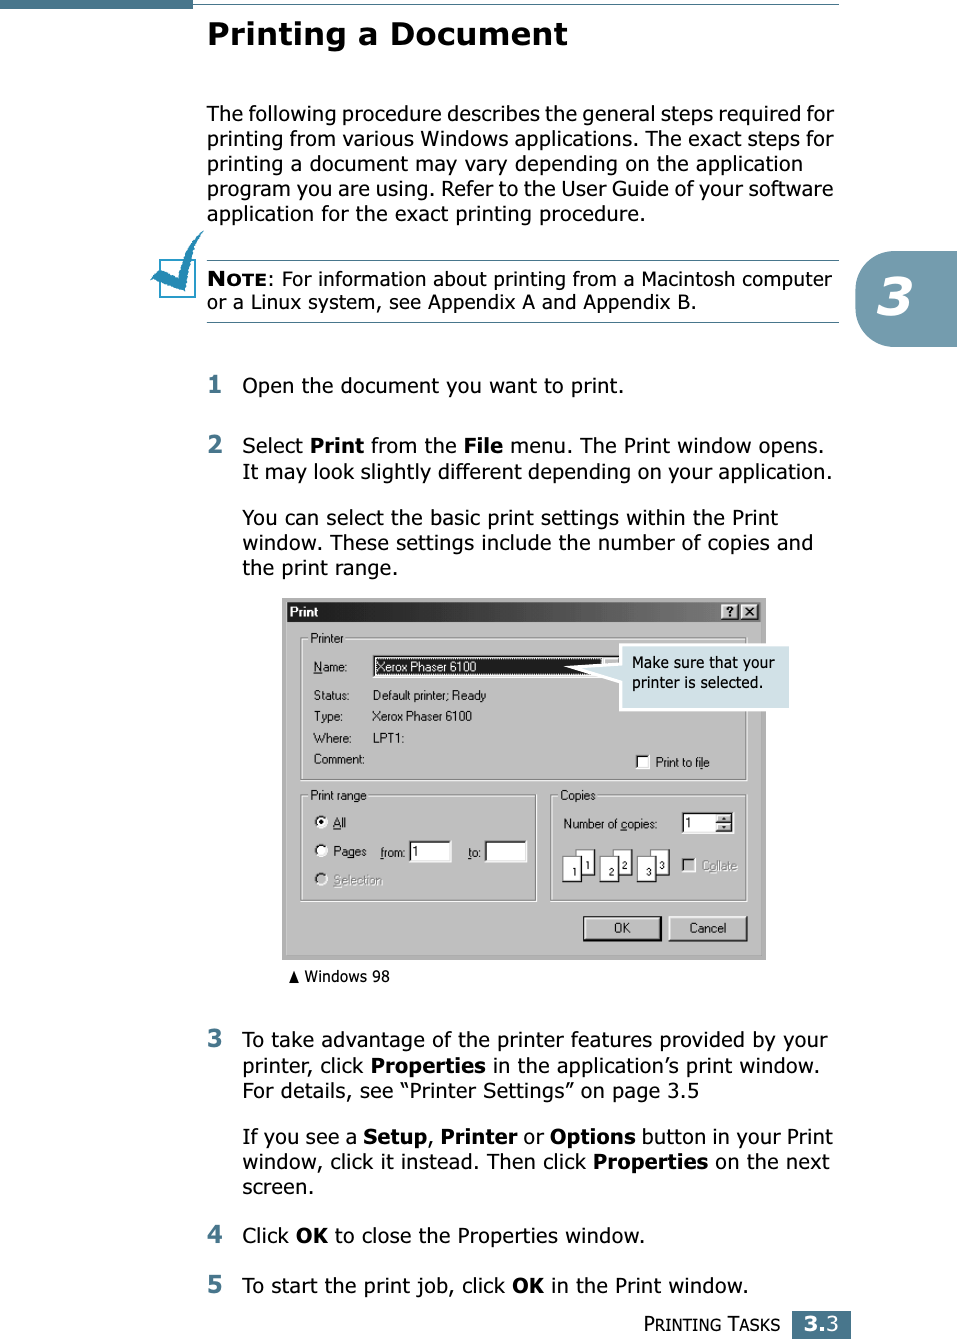 PRINTING TASKS3.33Printing a DocumentThe following procedure describes the general steps required for printing from various Windows applications. The exact steps for printing a document may vary depending on the application program you are using. Refer to the User Guide of your software application for the exact printing procedure.NOTE: For information about printing from a Macintosh computer or a Linux system, see Appendix A and Appendix B.1Open the document you want to print.2Select Print from the File menu. The Print window opens. It may look slightly different depending on your application. You can select the basic print settings within the Print window. These settings include the number of copies and the print range.3To take advantage of the printer features provided by your printer, click Properties in the application’s print window. For details, see “Printer Settings” on page 3.5If you see a Setup, Printer or Options button in your Print window, click it instead. Then click Properties on the next screen.4Click OK to close the Properties window.5To start the print job, click OK in the Print window.Make sure that your printer is selected.➐☎Windows 98